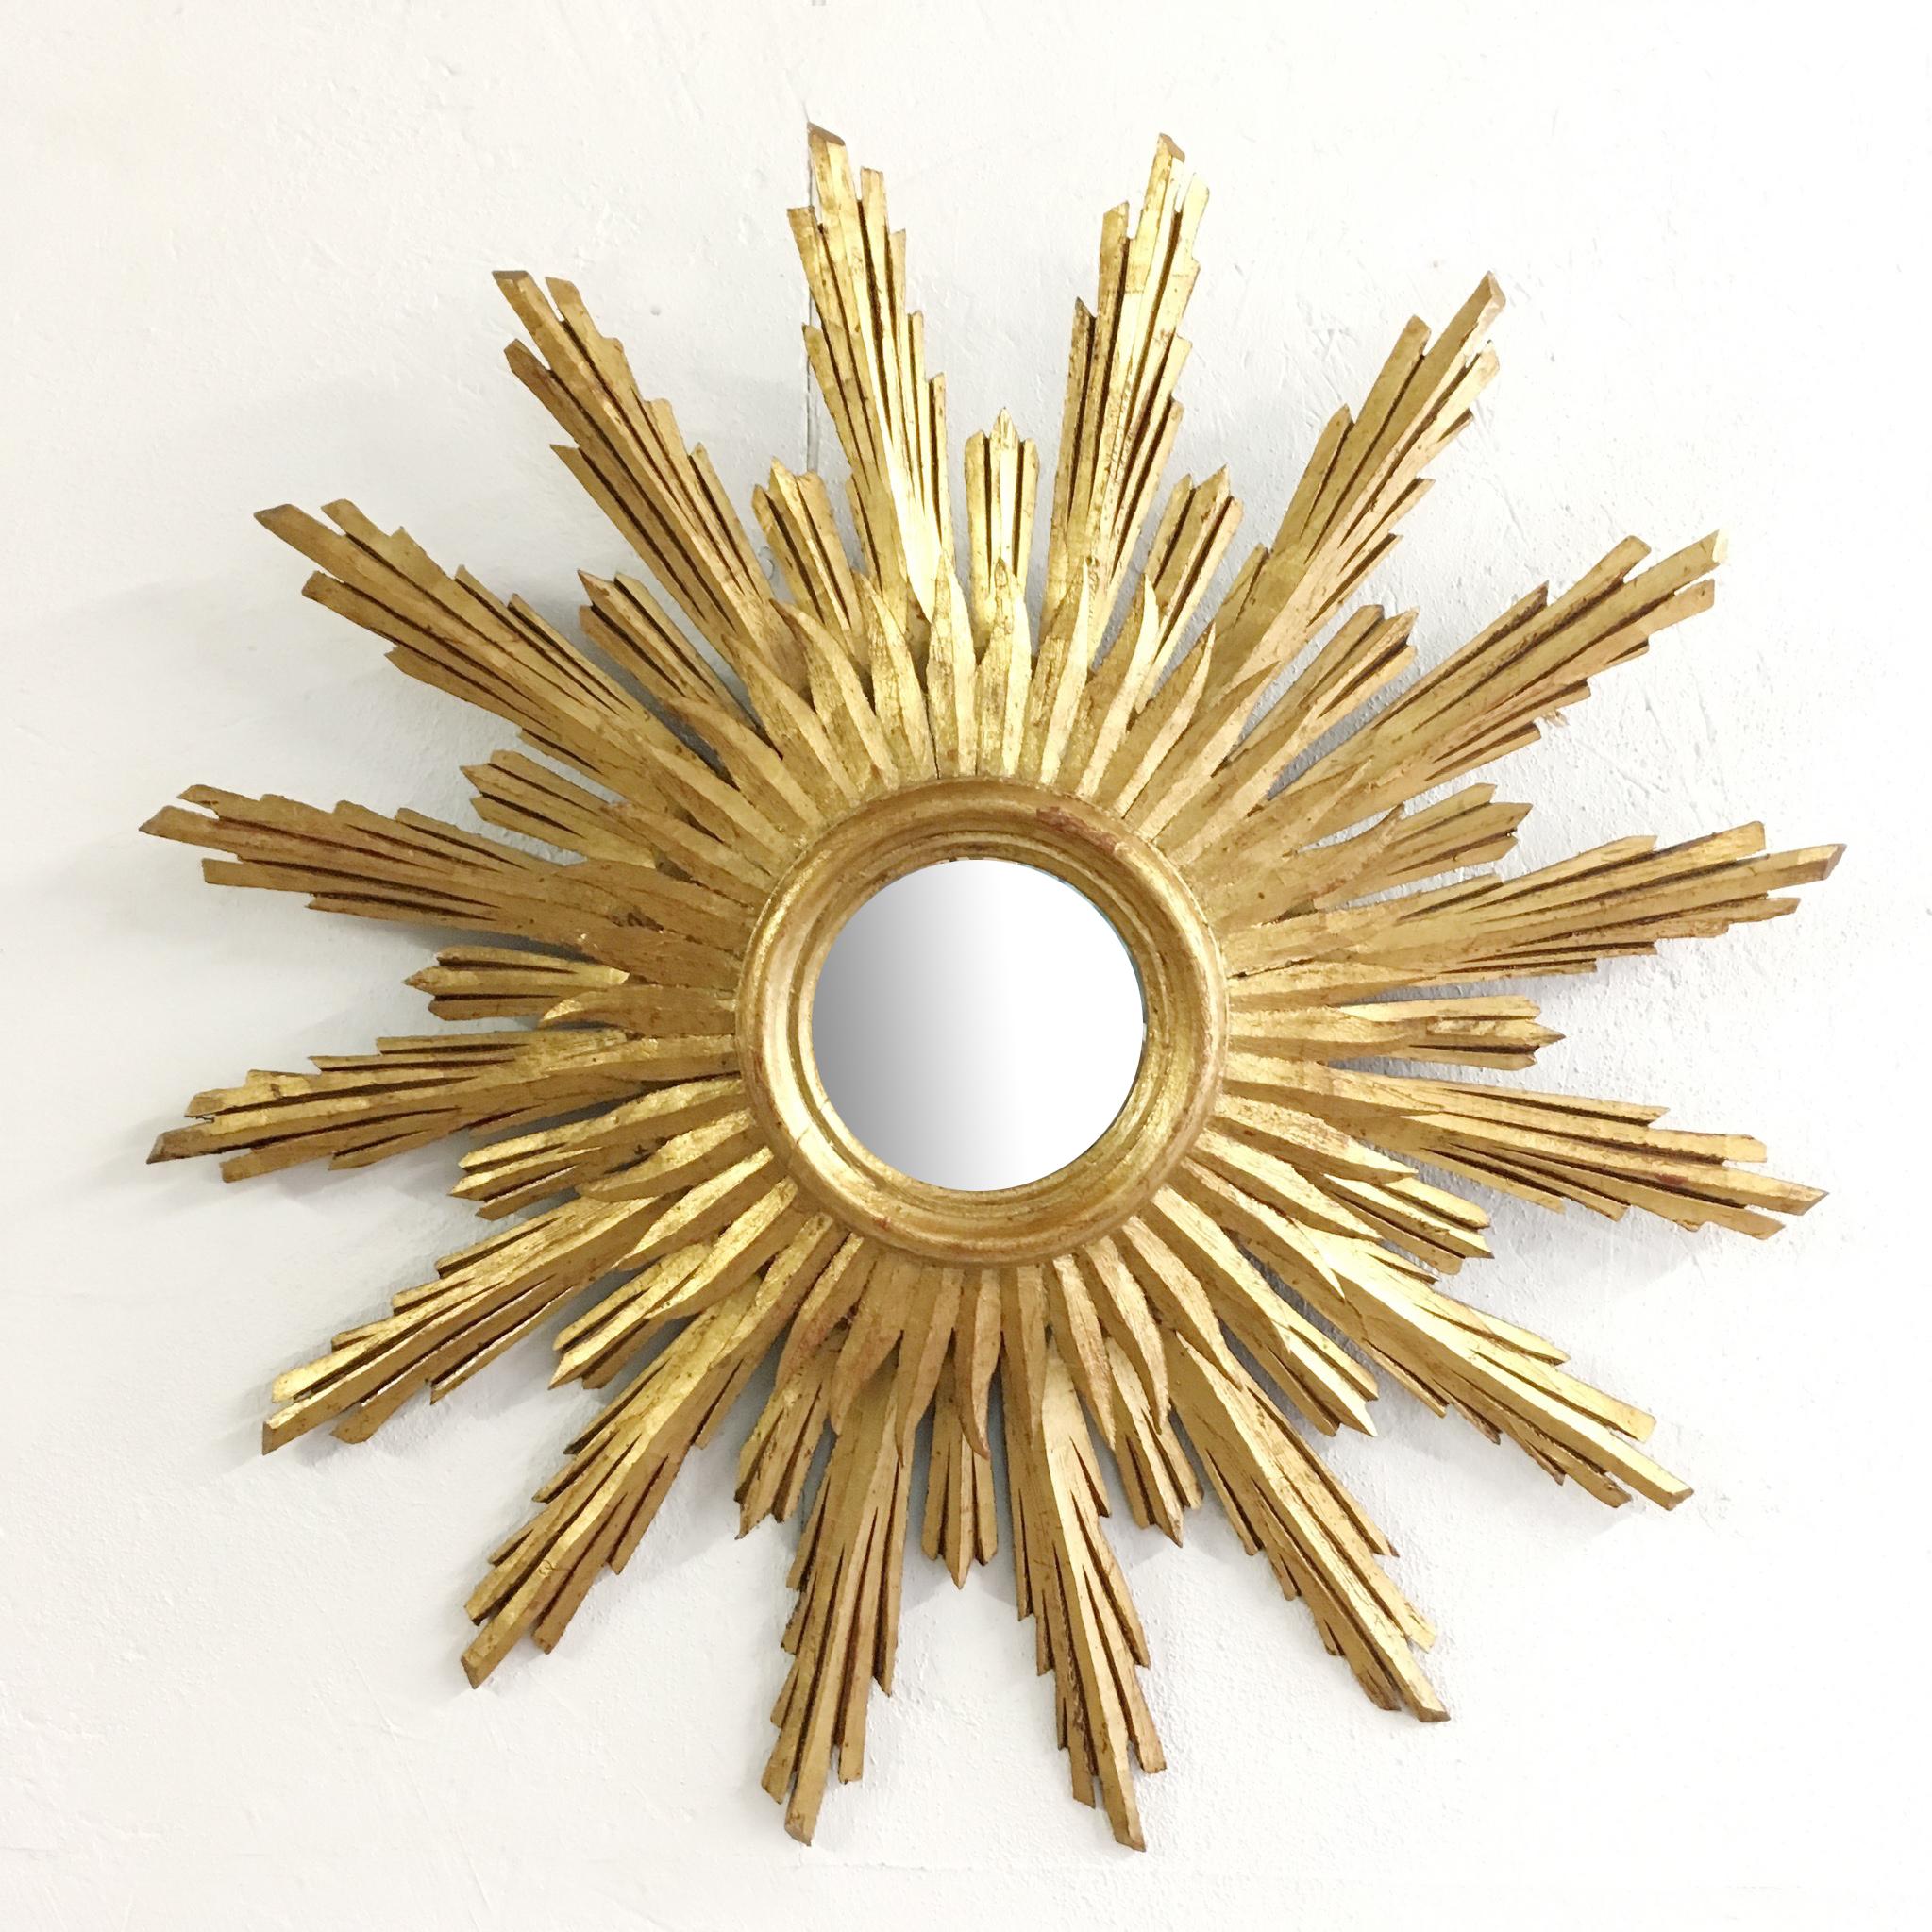 French handcrafted double layer wooden sunburst mirror
Beautiful double layer of wooden rays,
circa 1950s
Hand carved wood with original gilt finish
Measures: 64.5 cm total width
8 cm mirror width
Hanging hook on reverse
No damage or